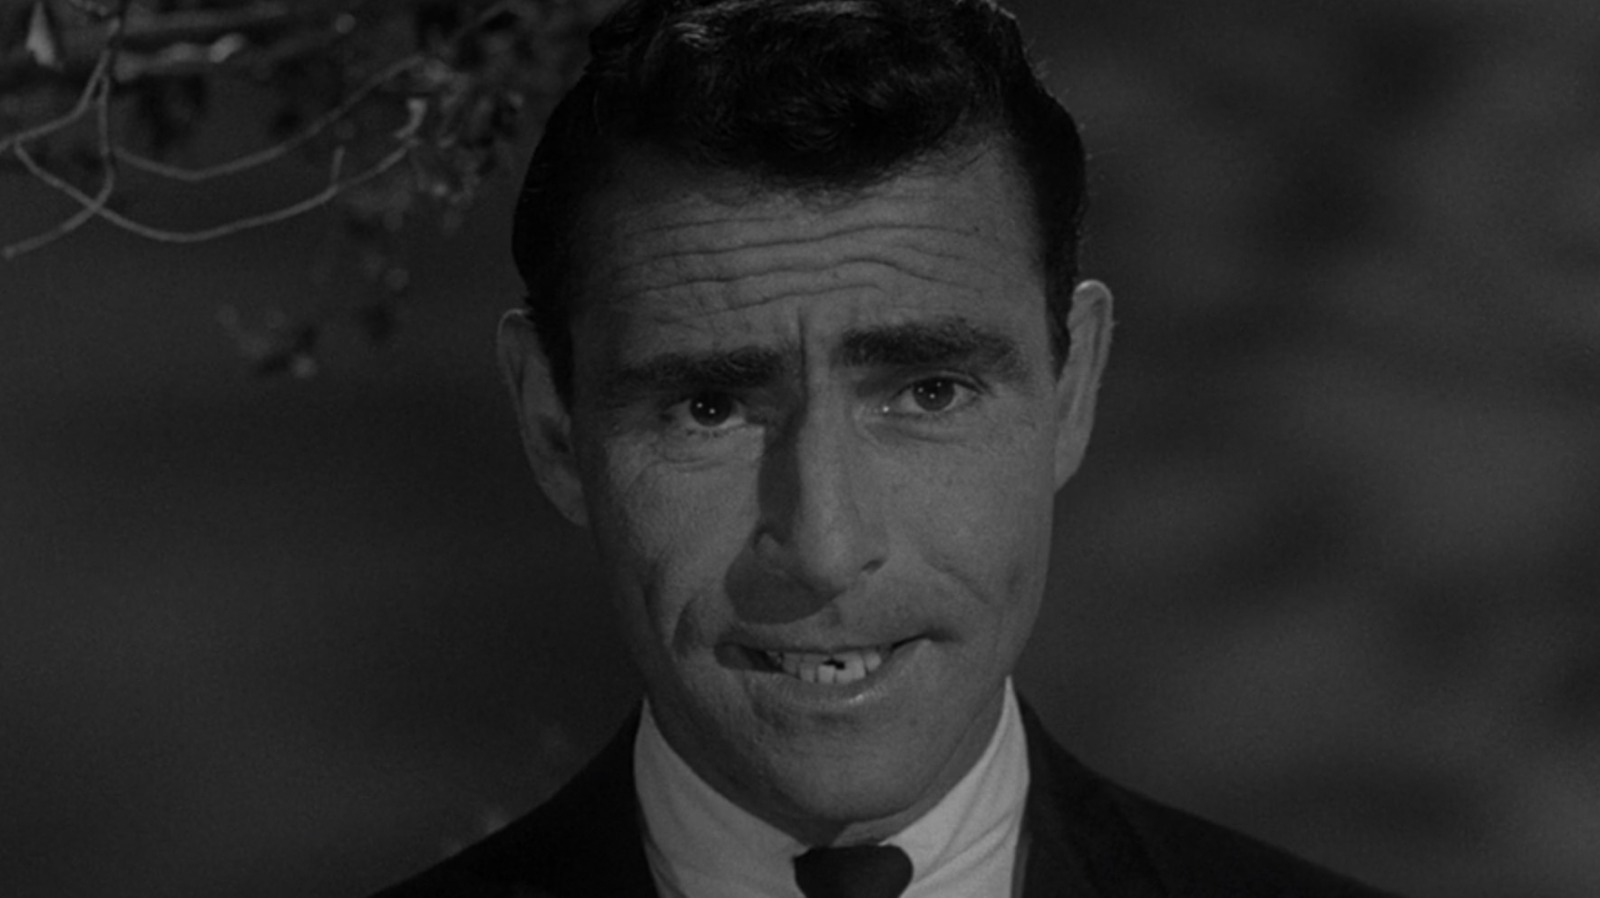 A classic 'Twilight Zone' episode warns us how not to behave